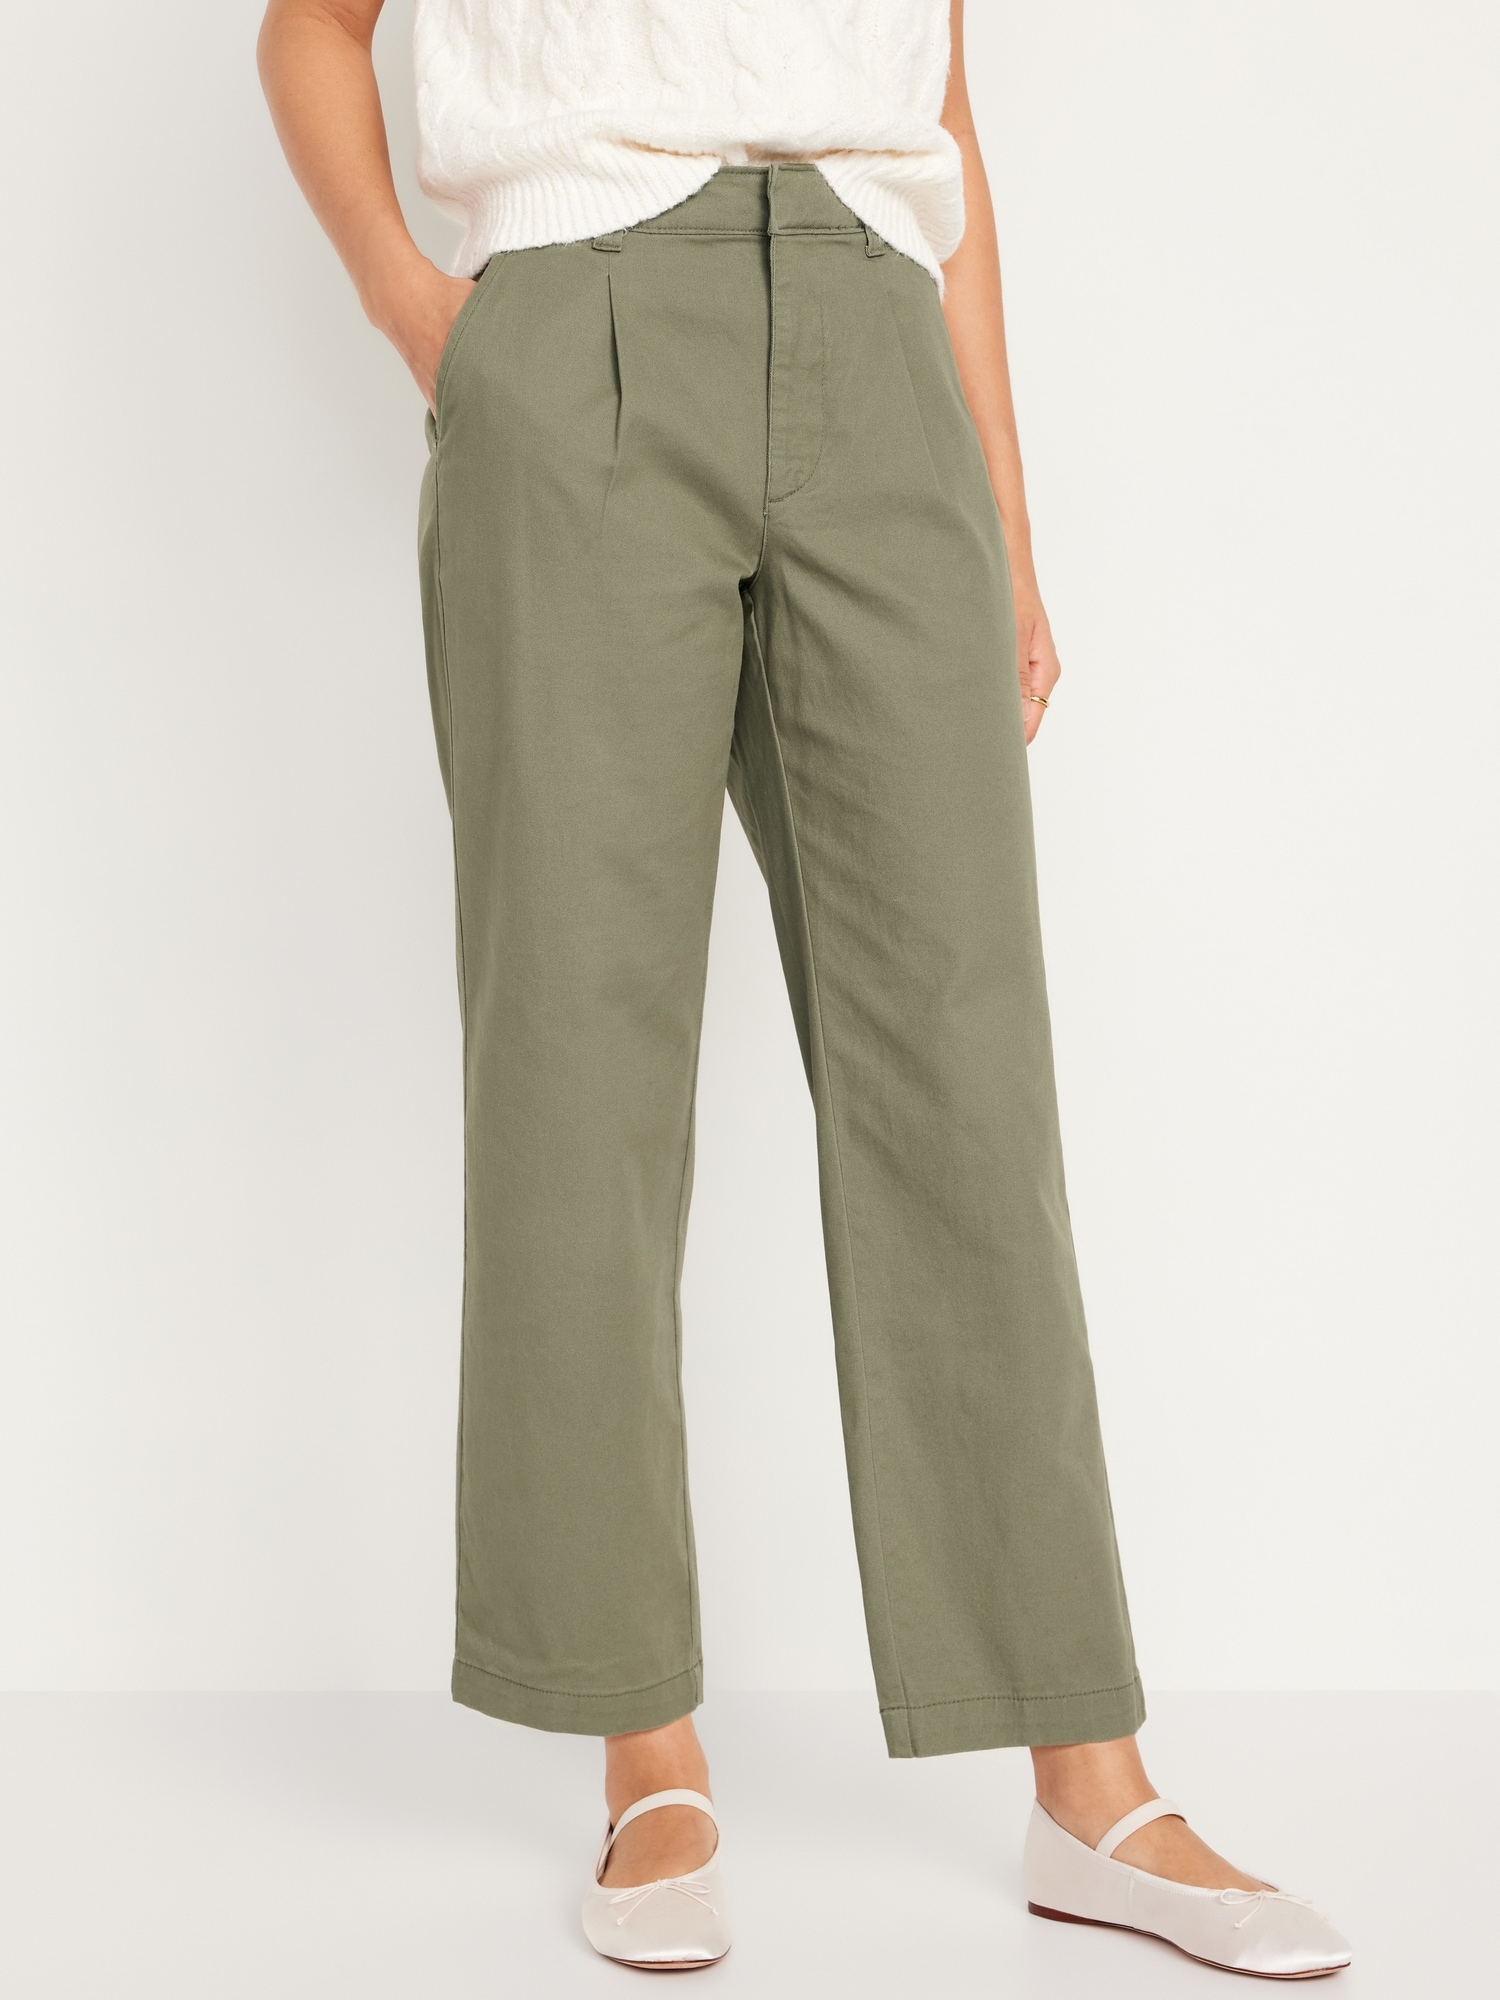 High-Waisted Pleated Chino Ankle Pants | Old Navy